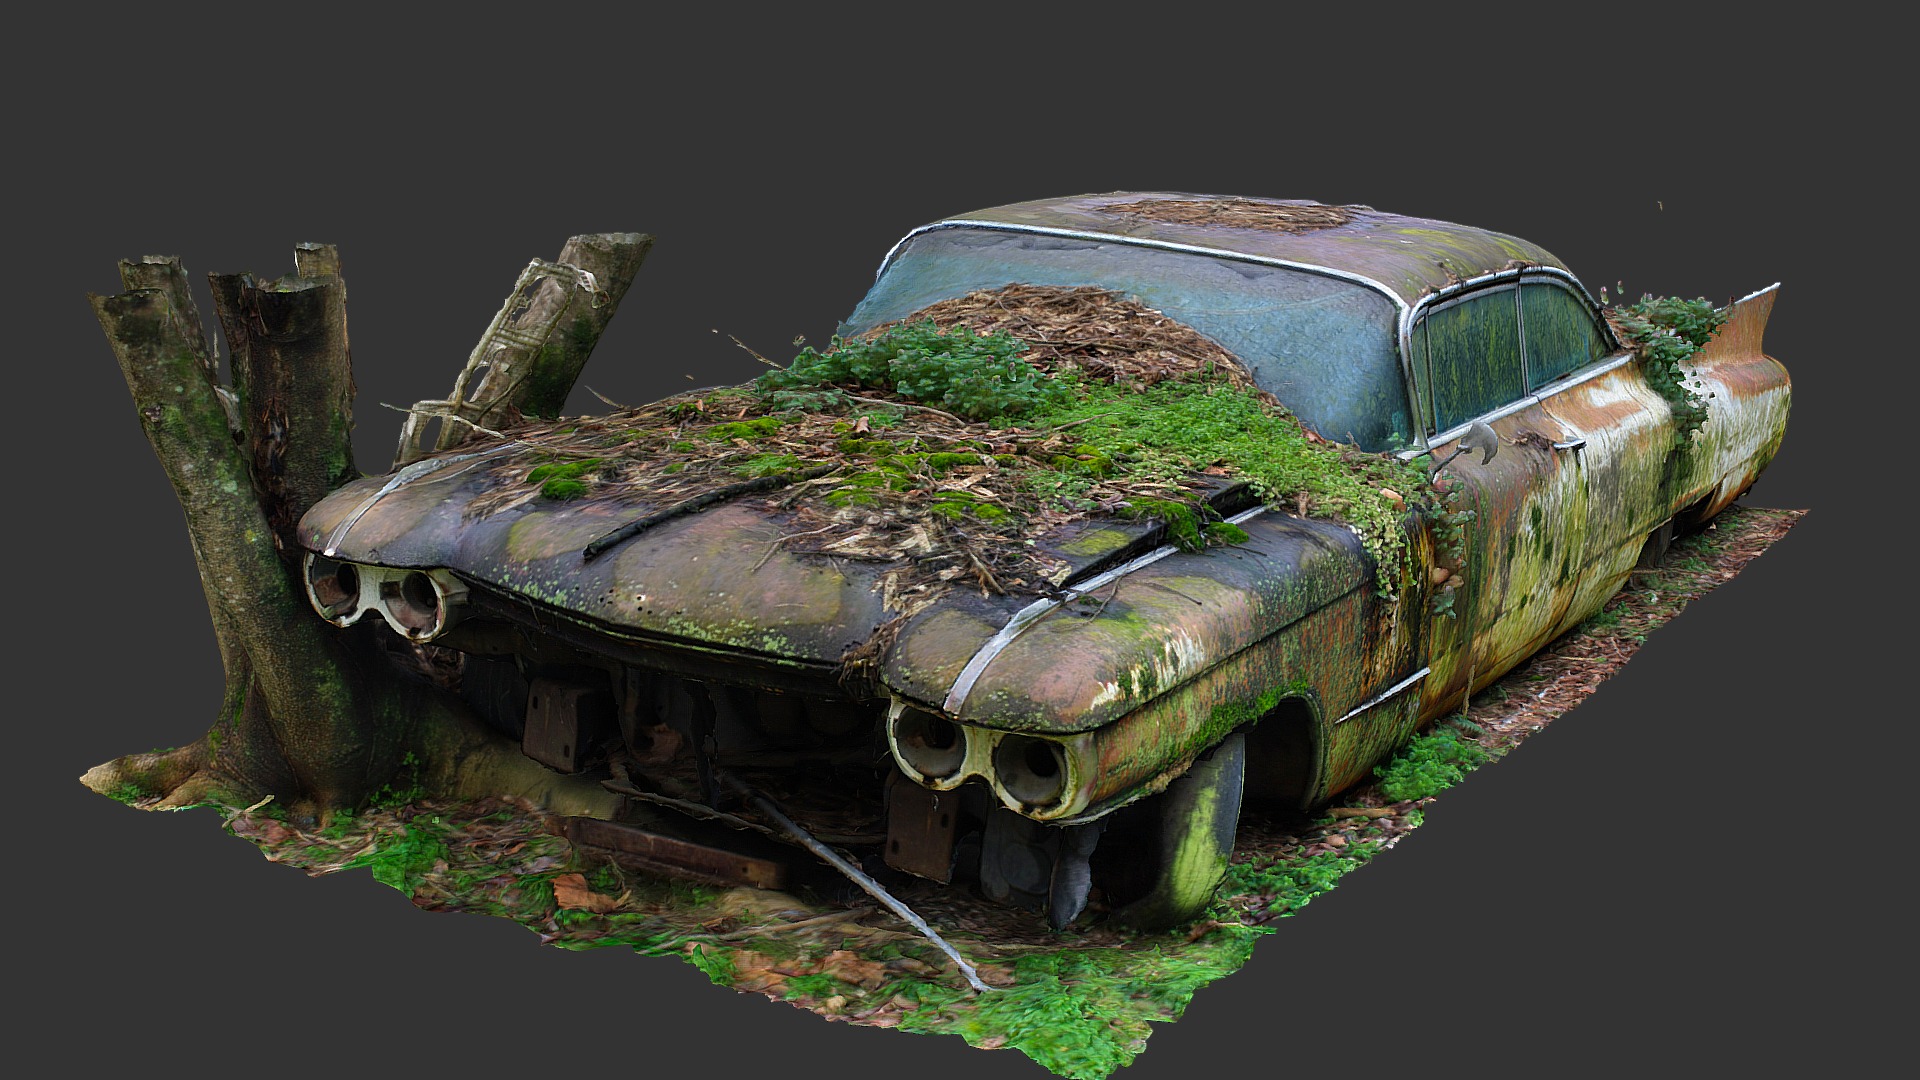 And so, this car, my personal favorite that I've collected with scanning, is the final scan from my &ldquo;Old Car City